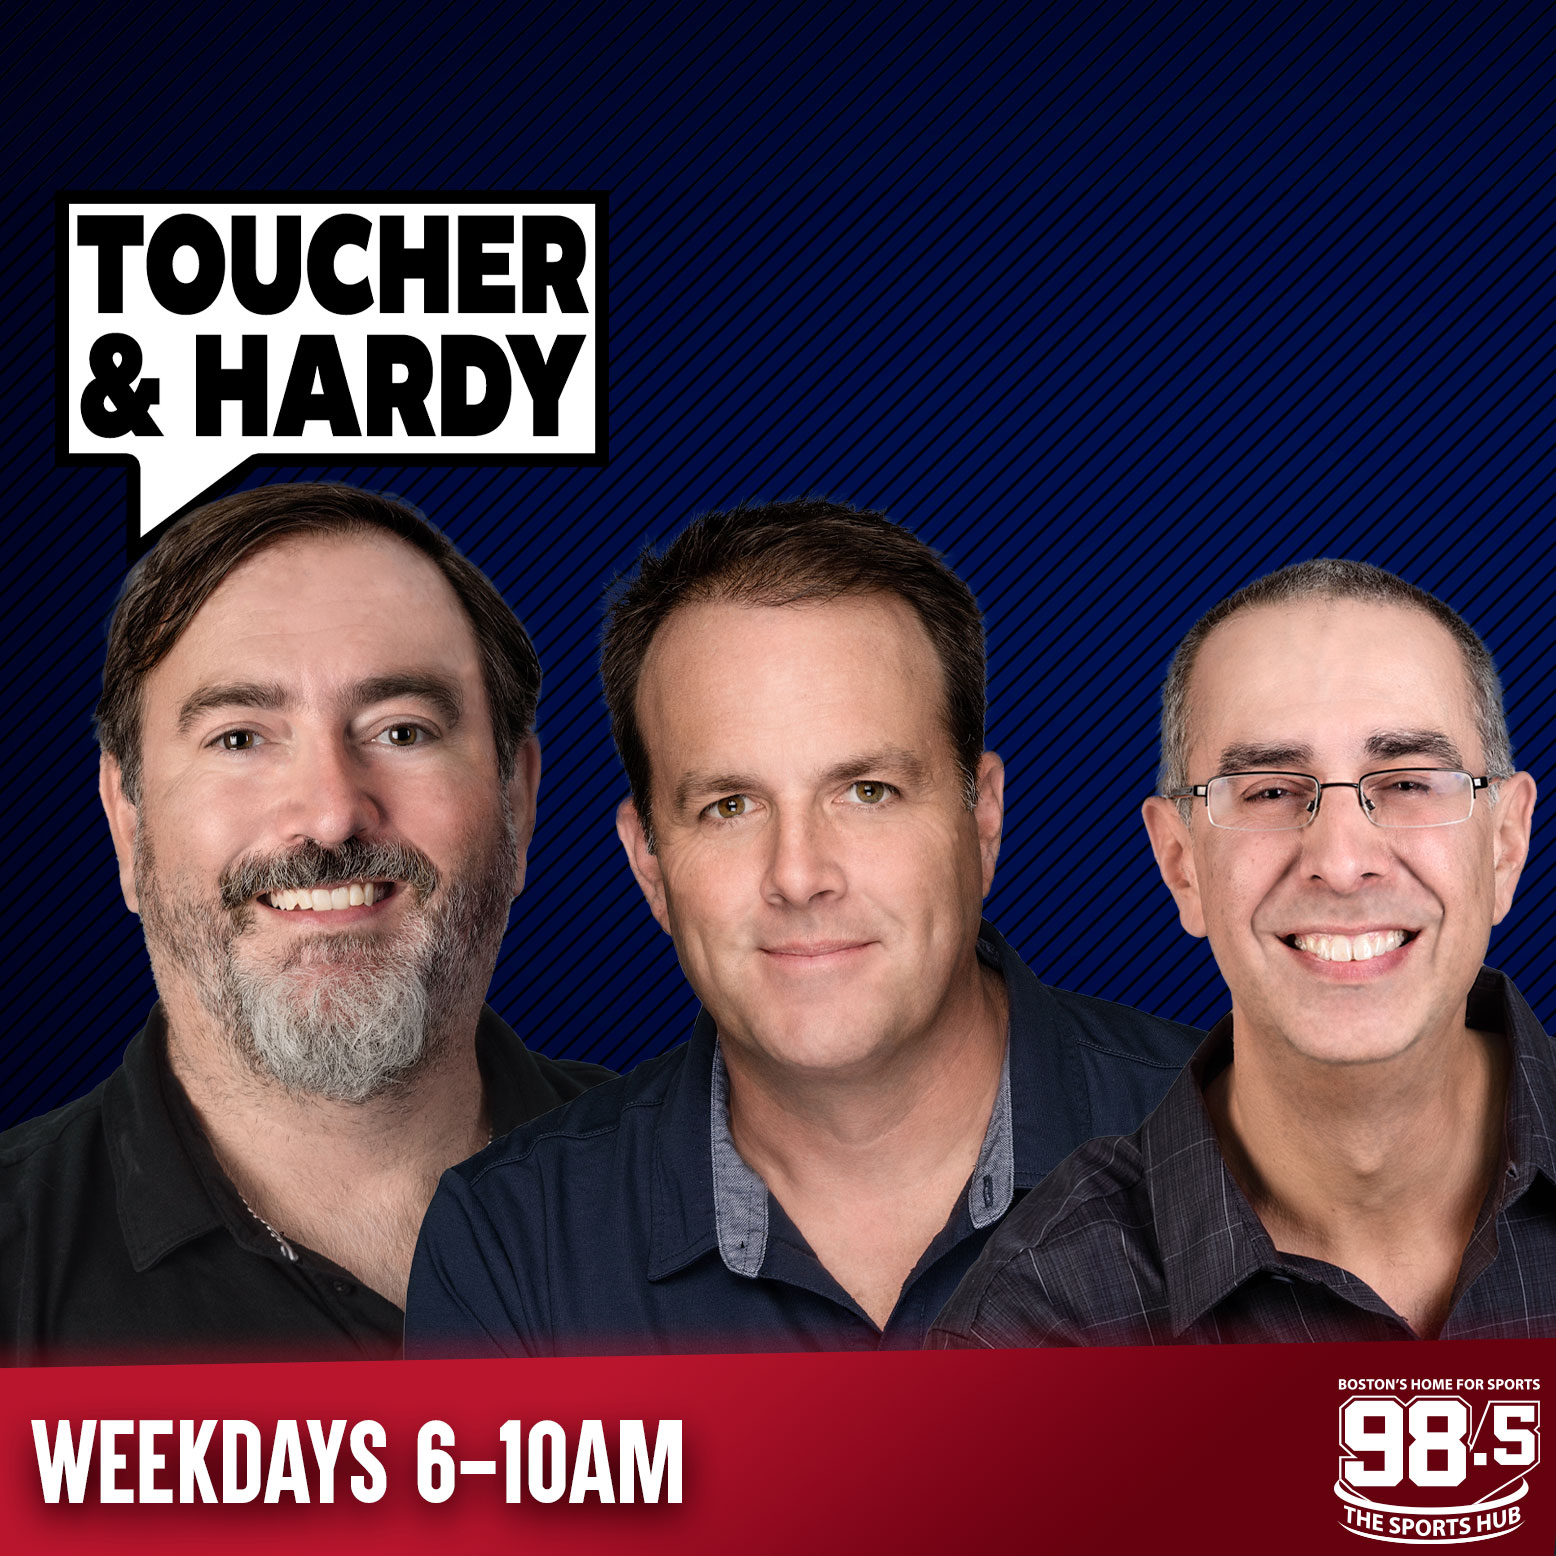 Bonus time with Breer | Unwanted seeds on produce | Hardy’s Masters fever heats - 4/11 (Hour 3)